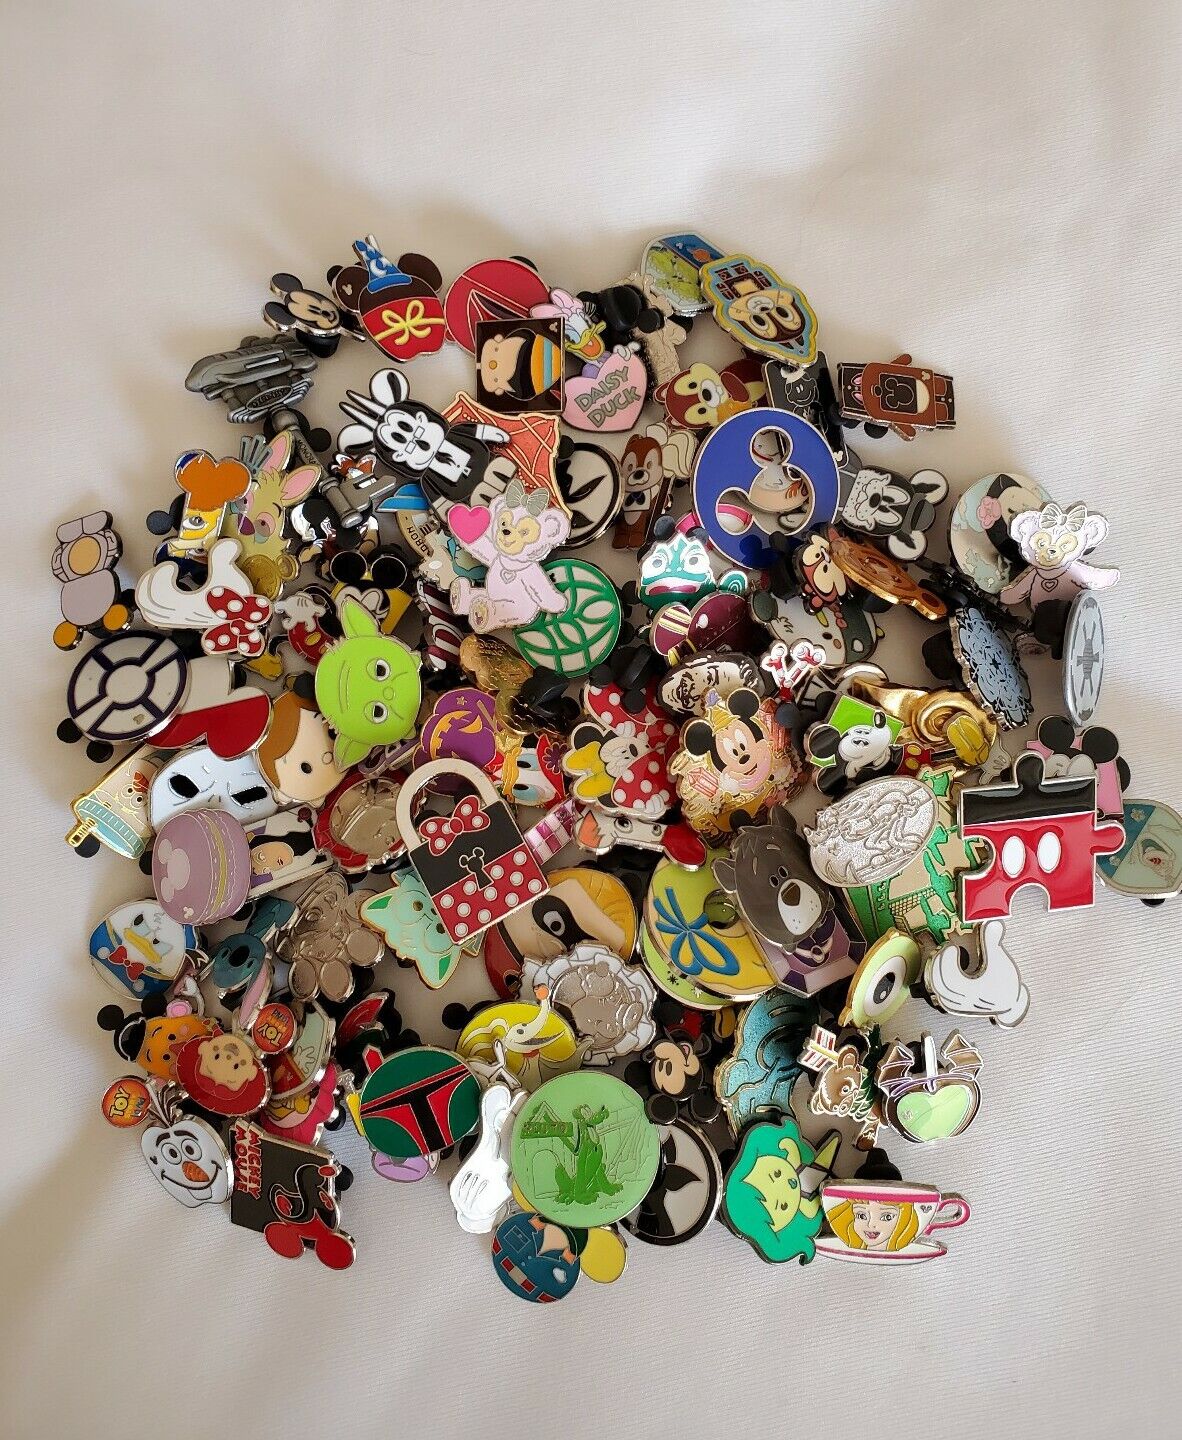 DISNEY TRADING PINS 100 LOT, NO DOUBLES Free Priority 1-3 Day Ship